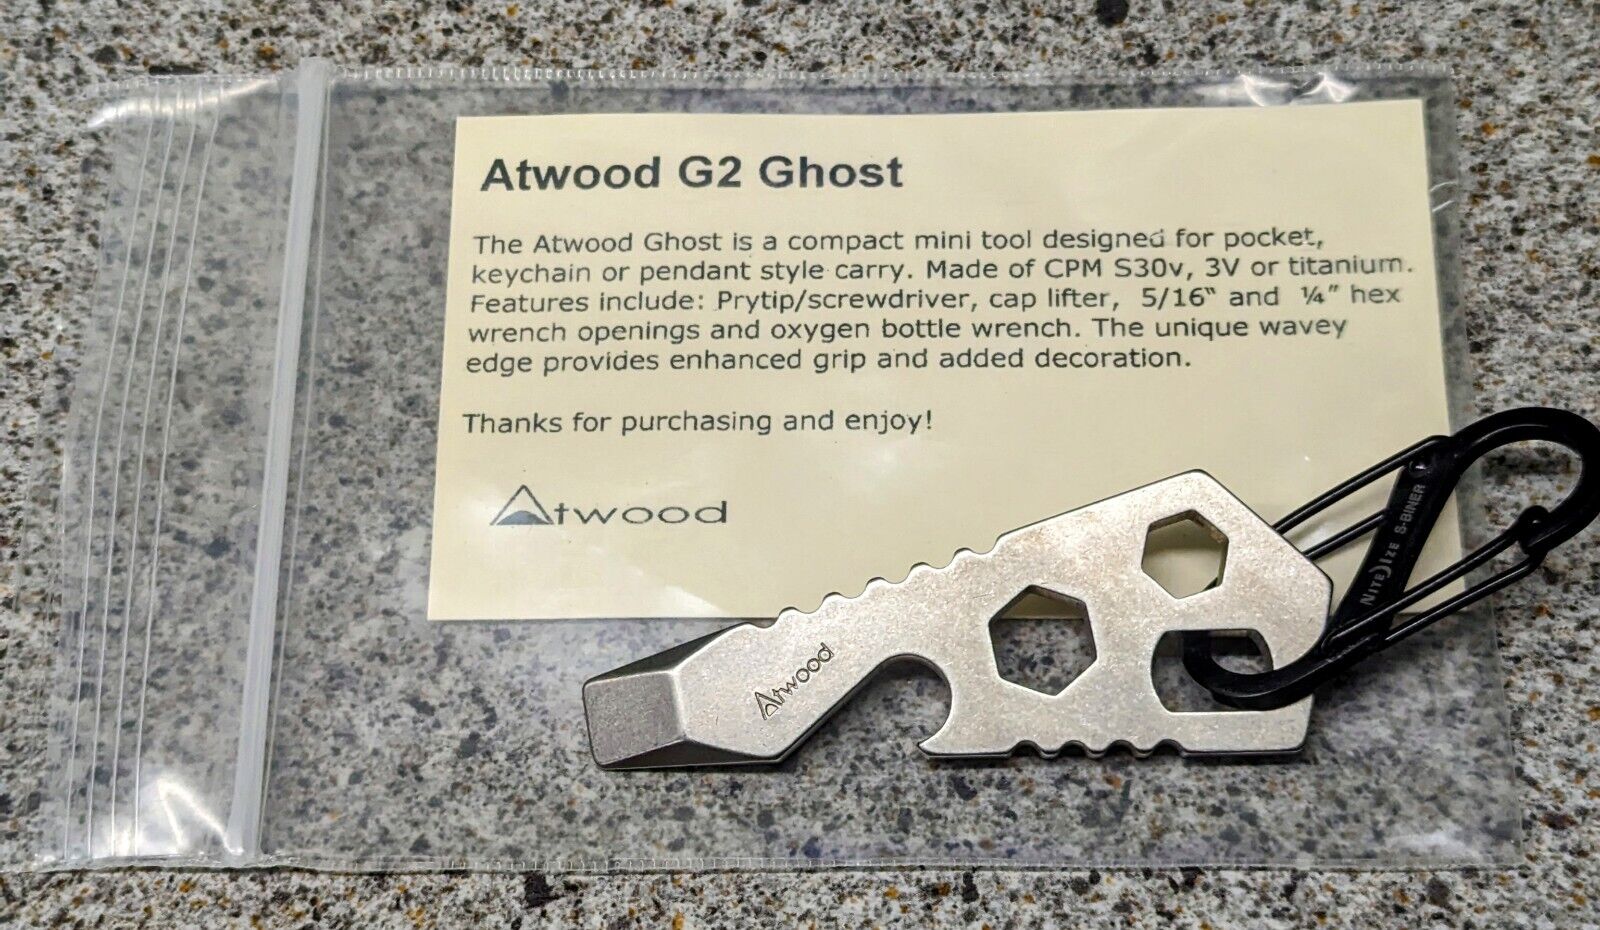 NEW Peter Atwood G2 Ghost - Stonewashed S30v with Nite Ize Clip